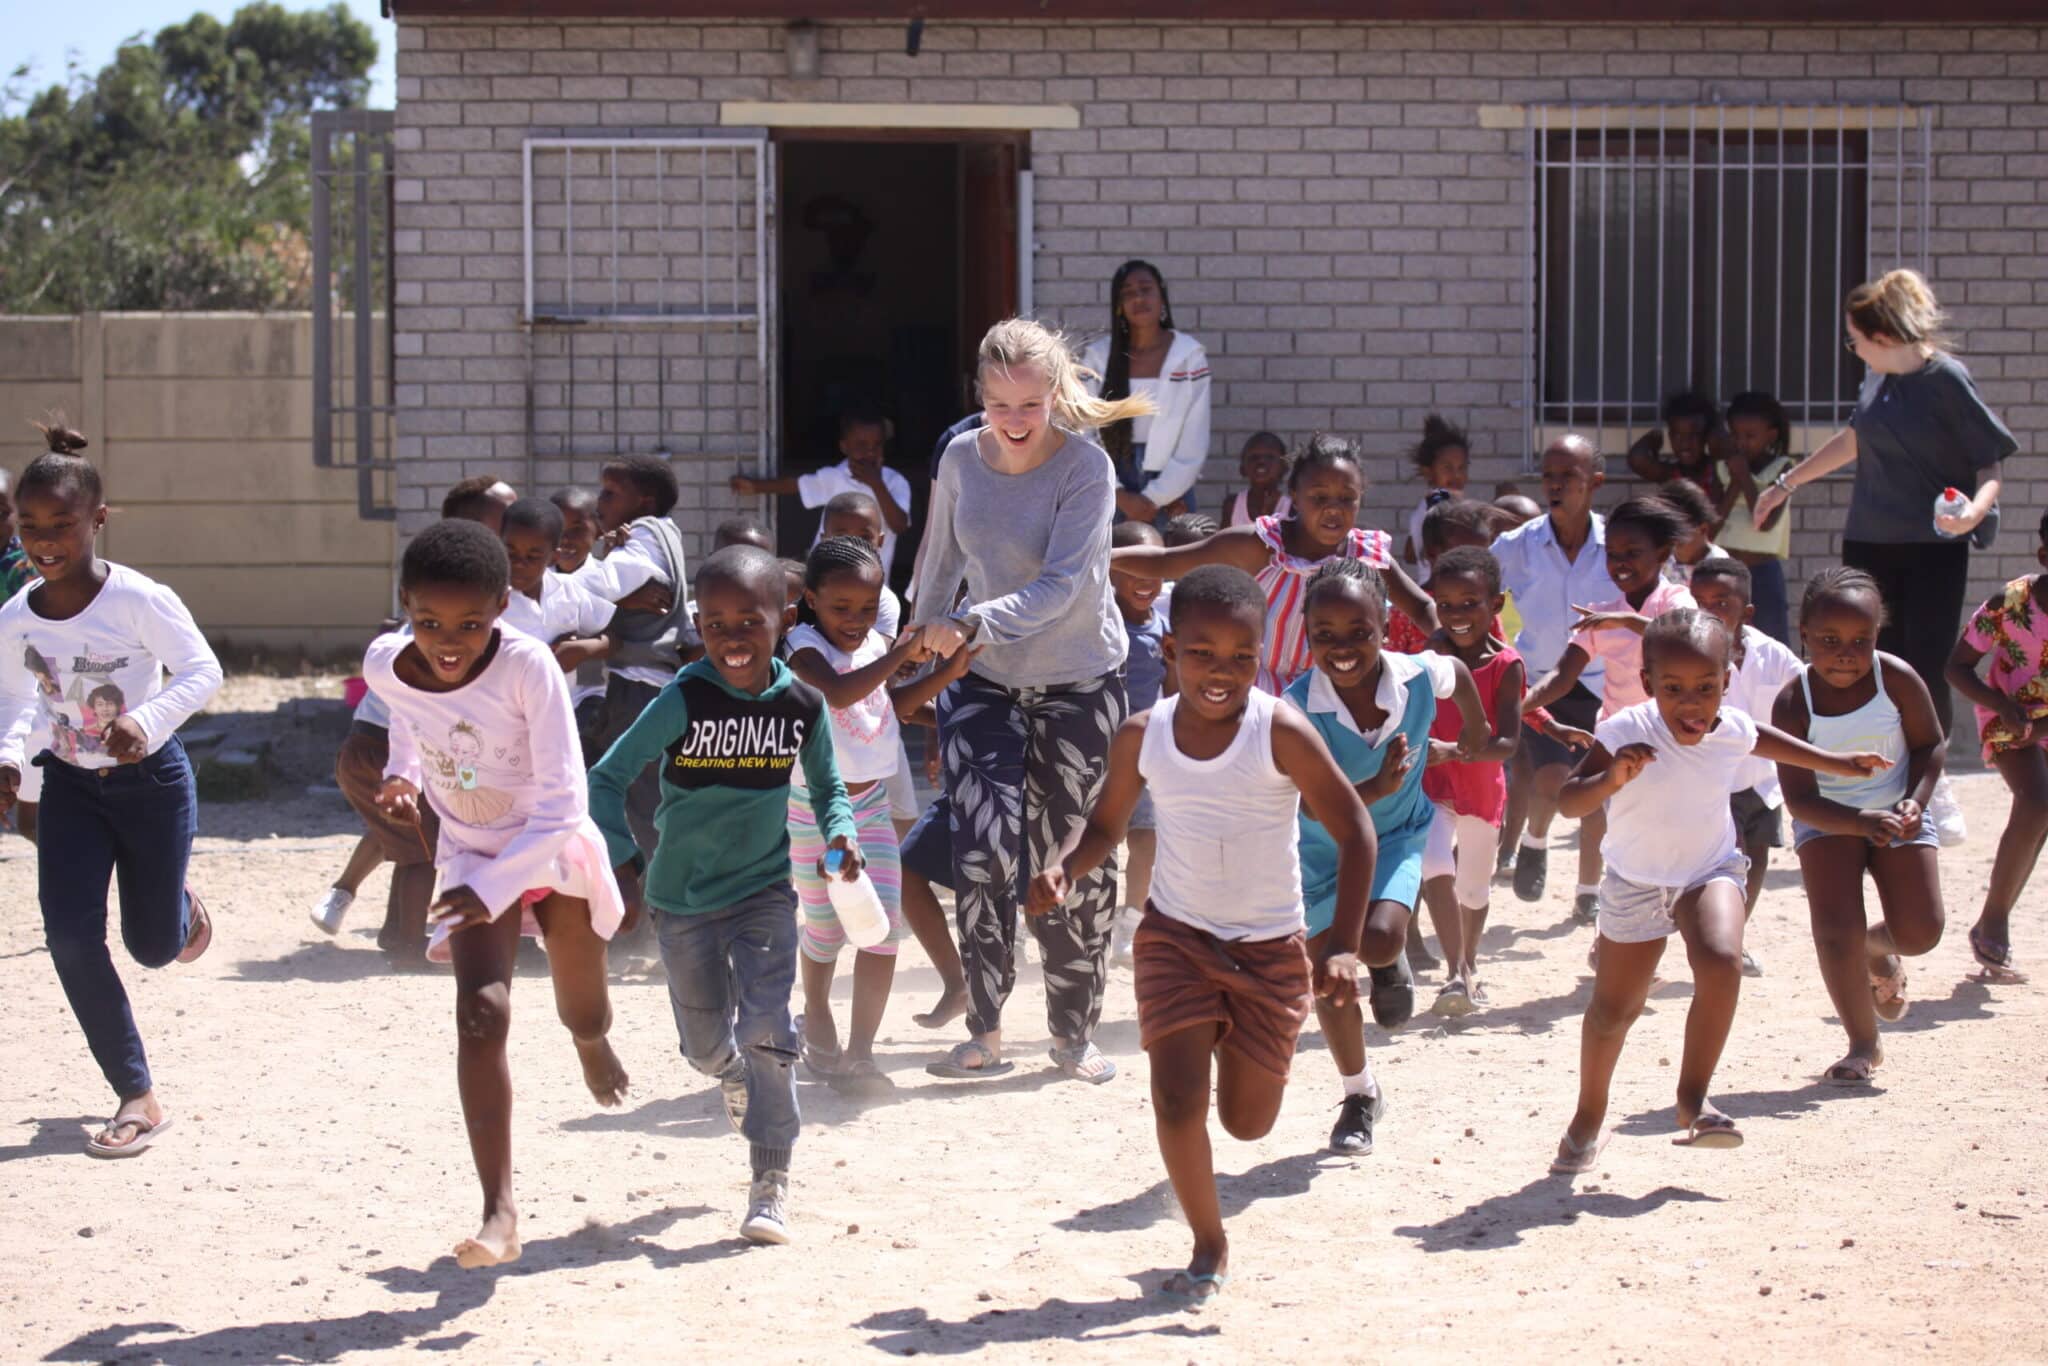 volunteer in cape town with children playing a game outside